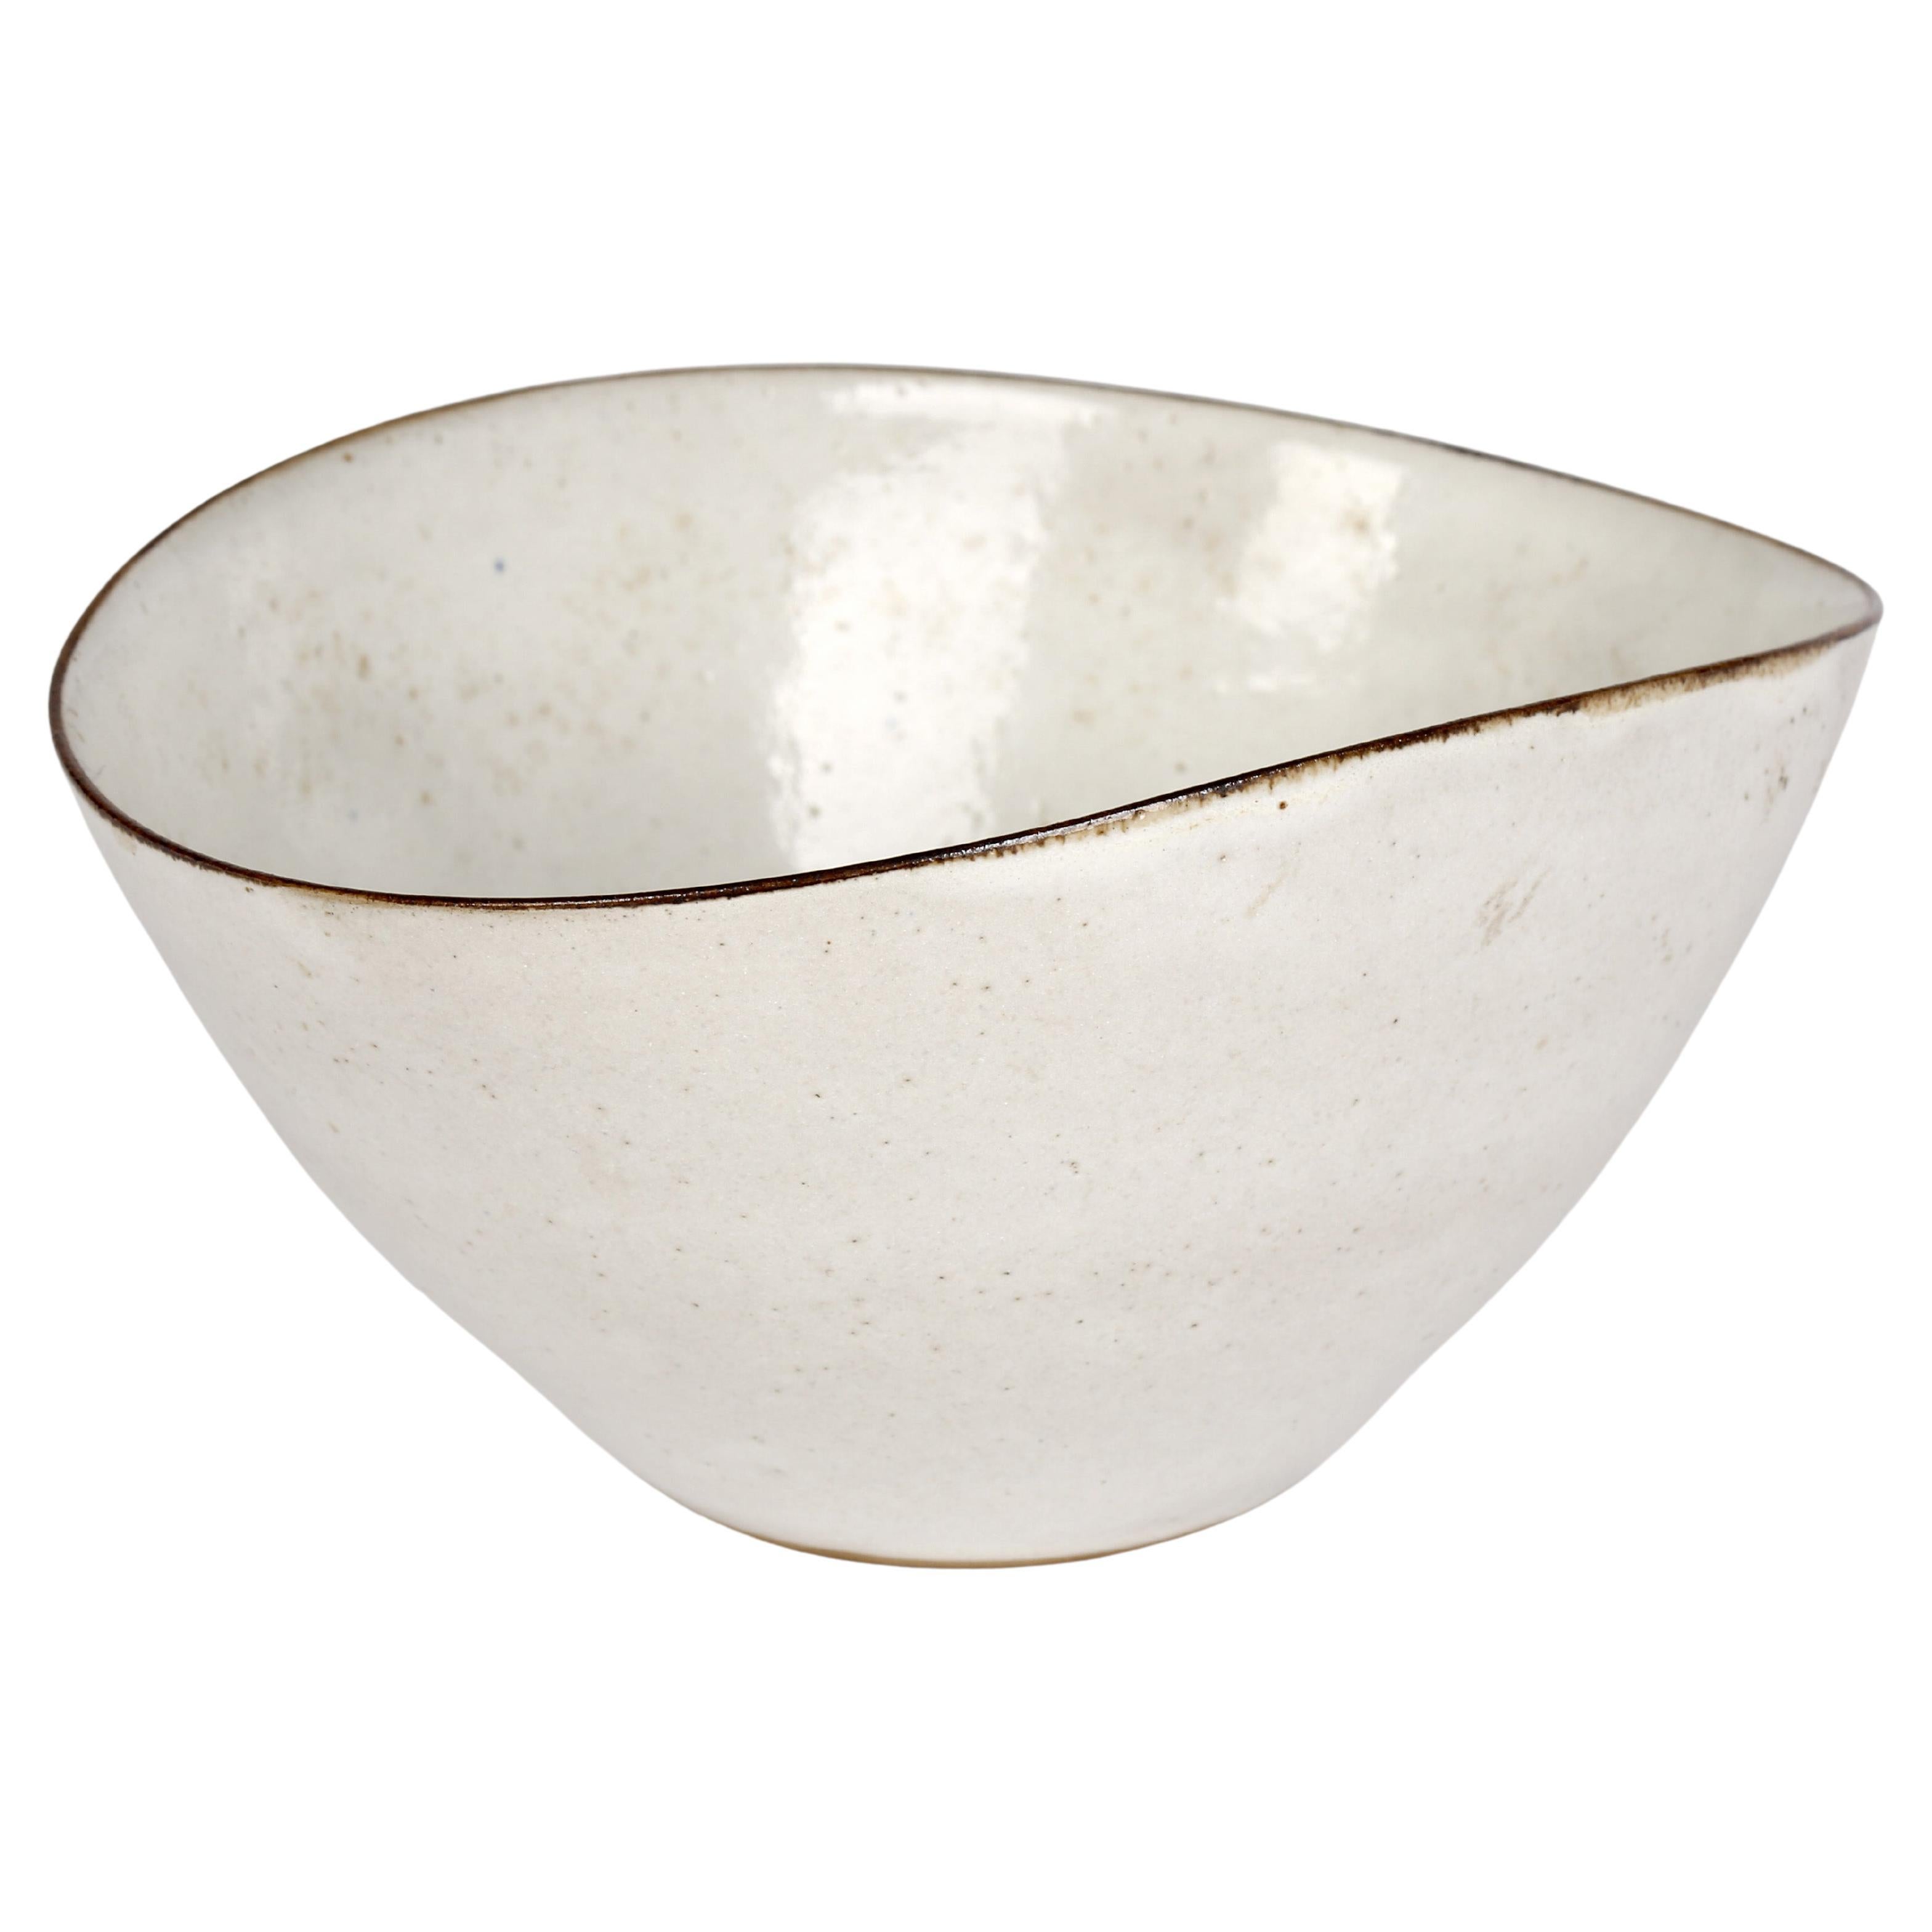 Rie Yellow Speckle British Pottery Bowl, circa 1950s For Sale at 1stDibs